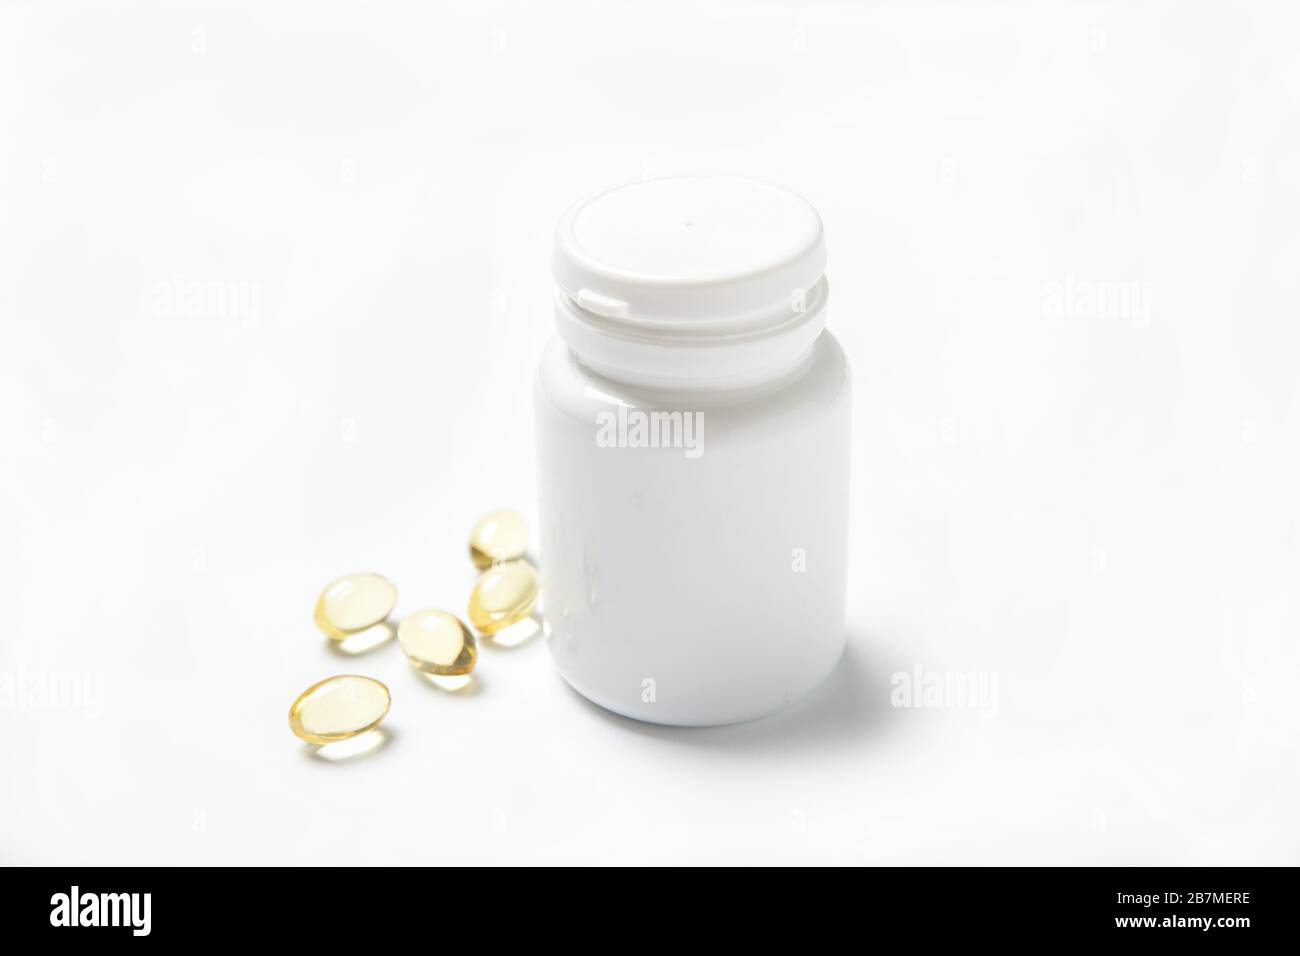 Fish oil pills in a jar on a white background. Omega 3. Vitamins Stock Photo